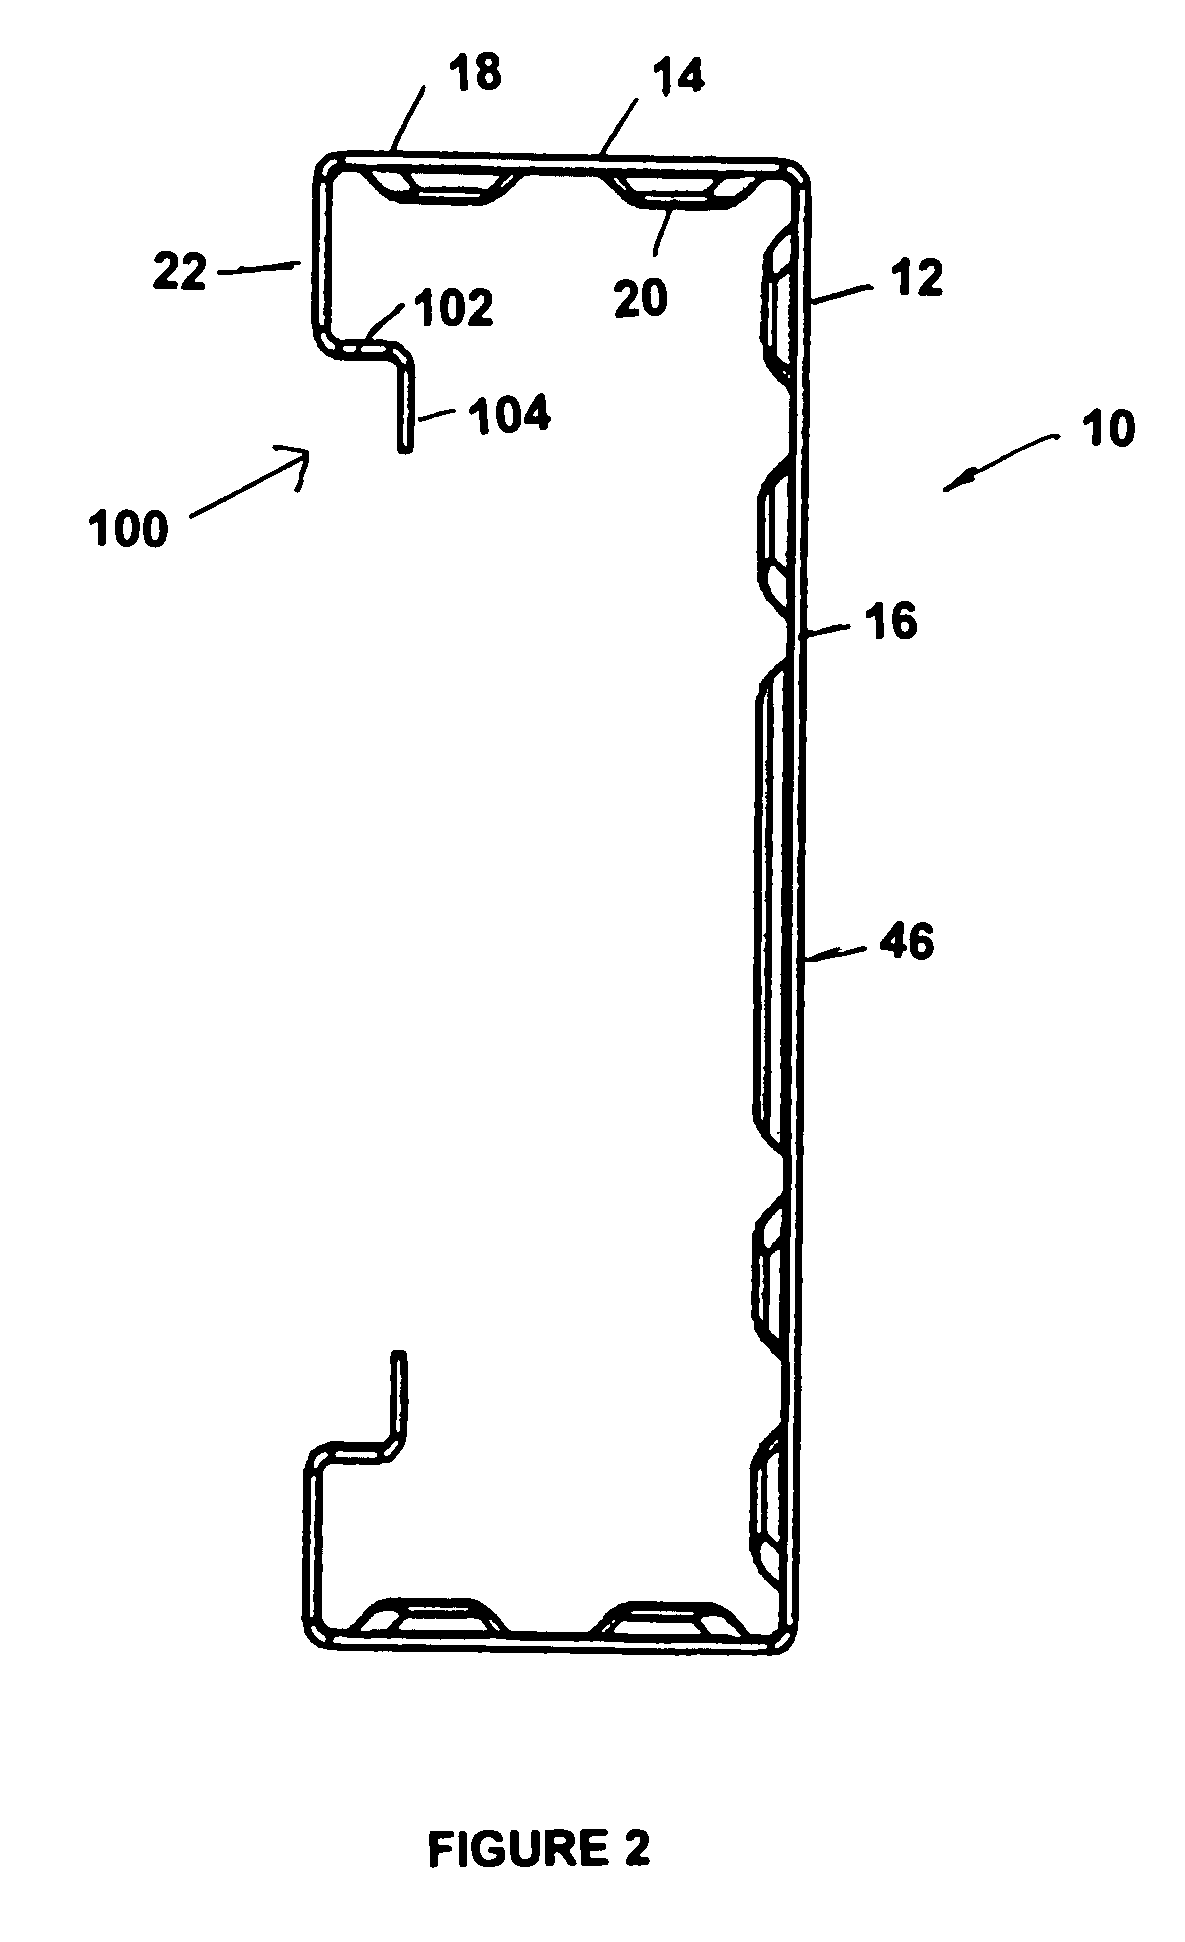 Light steel structural members